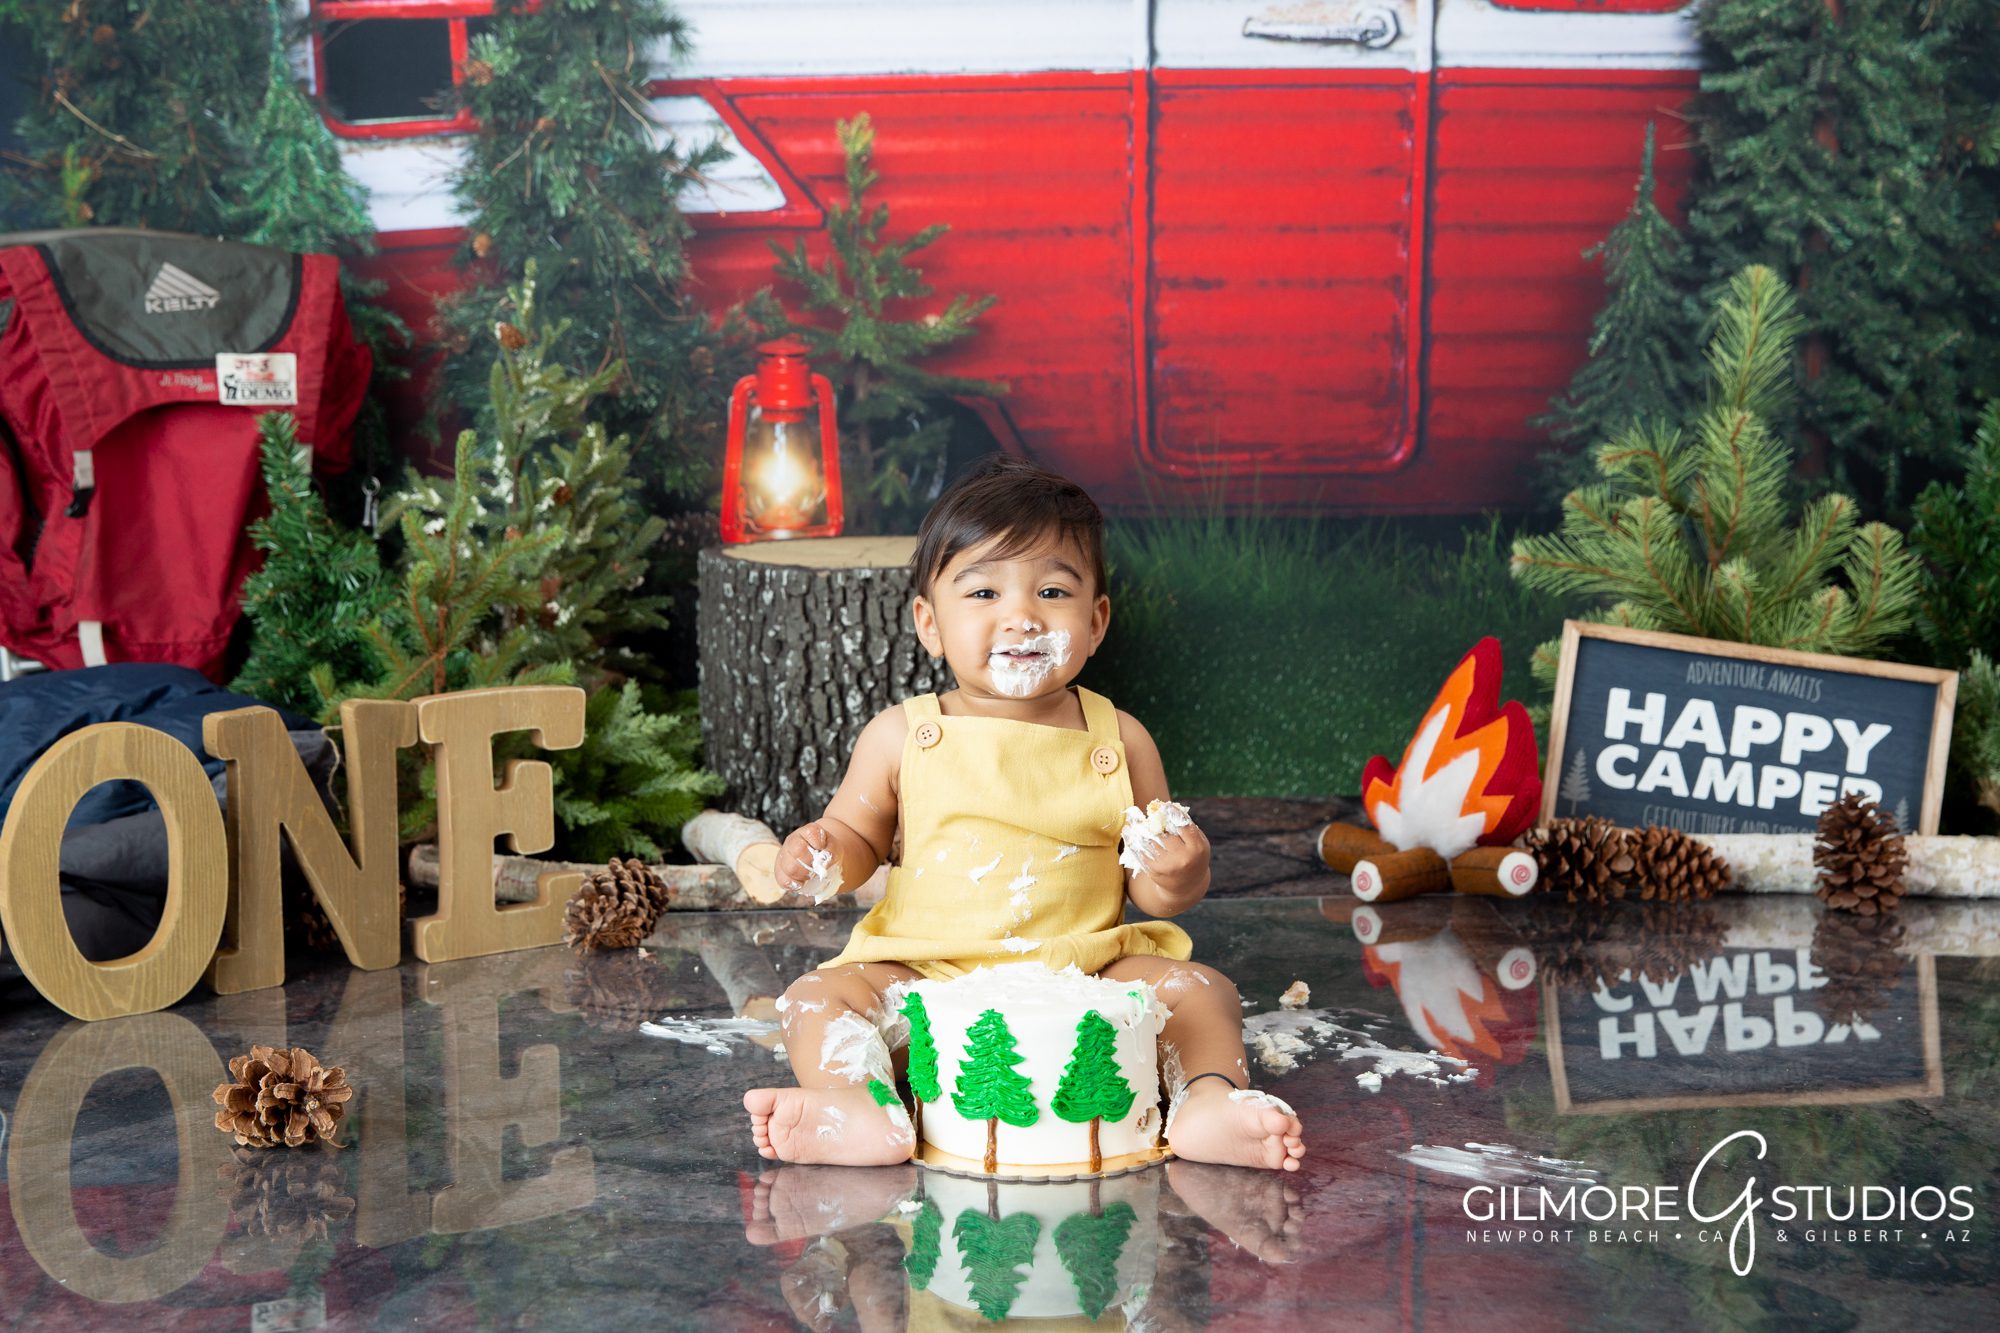 Camping themed cake smash by Gilmore Studios, camper, trailer, woods, forest, outdoors, camp fire, happy camper, pine trees, great outdoors, one year old, 1 year old, first birthday, photographer, background, set design, cakes, smashcake